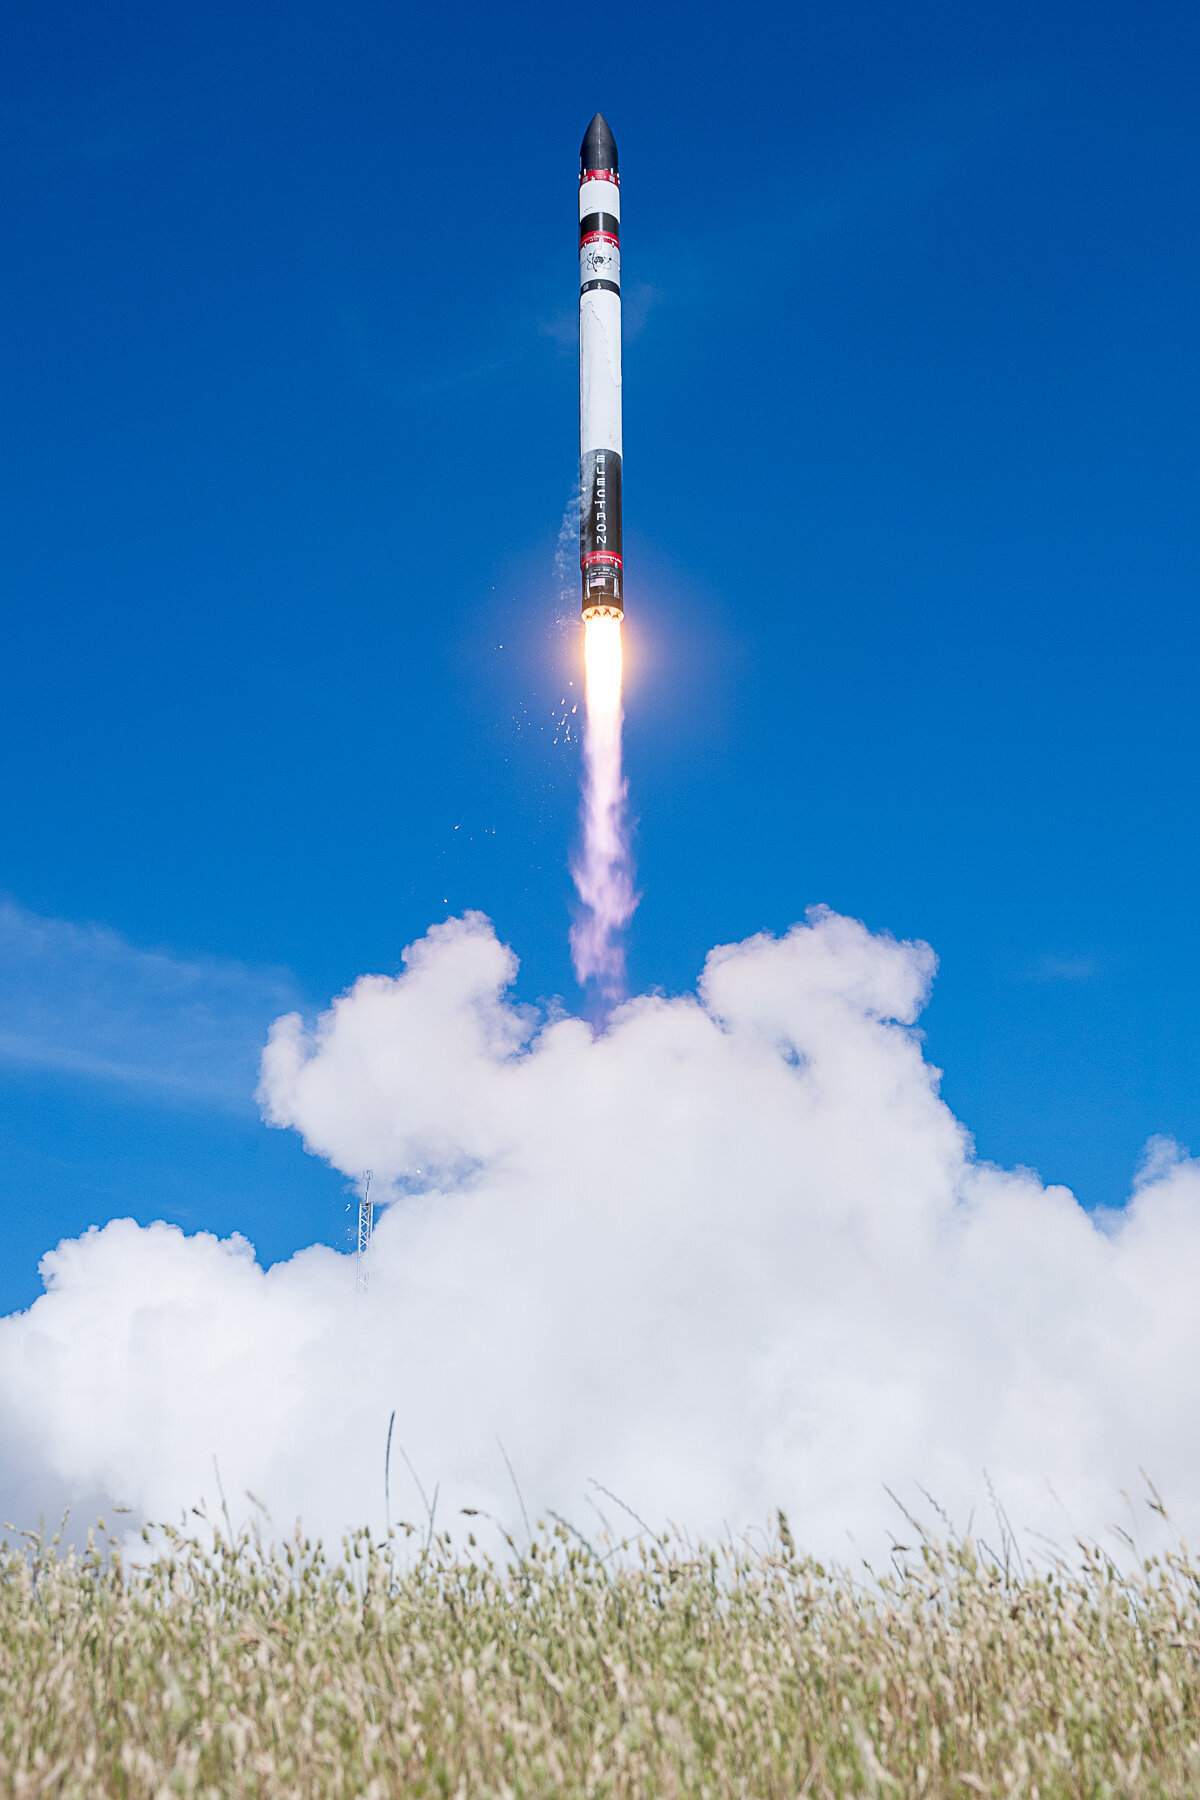 Rocket Lab's Electron rocket launch. Blue sky background  with fire from engines and exhaust smoke below.